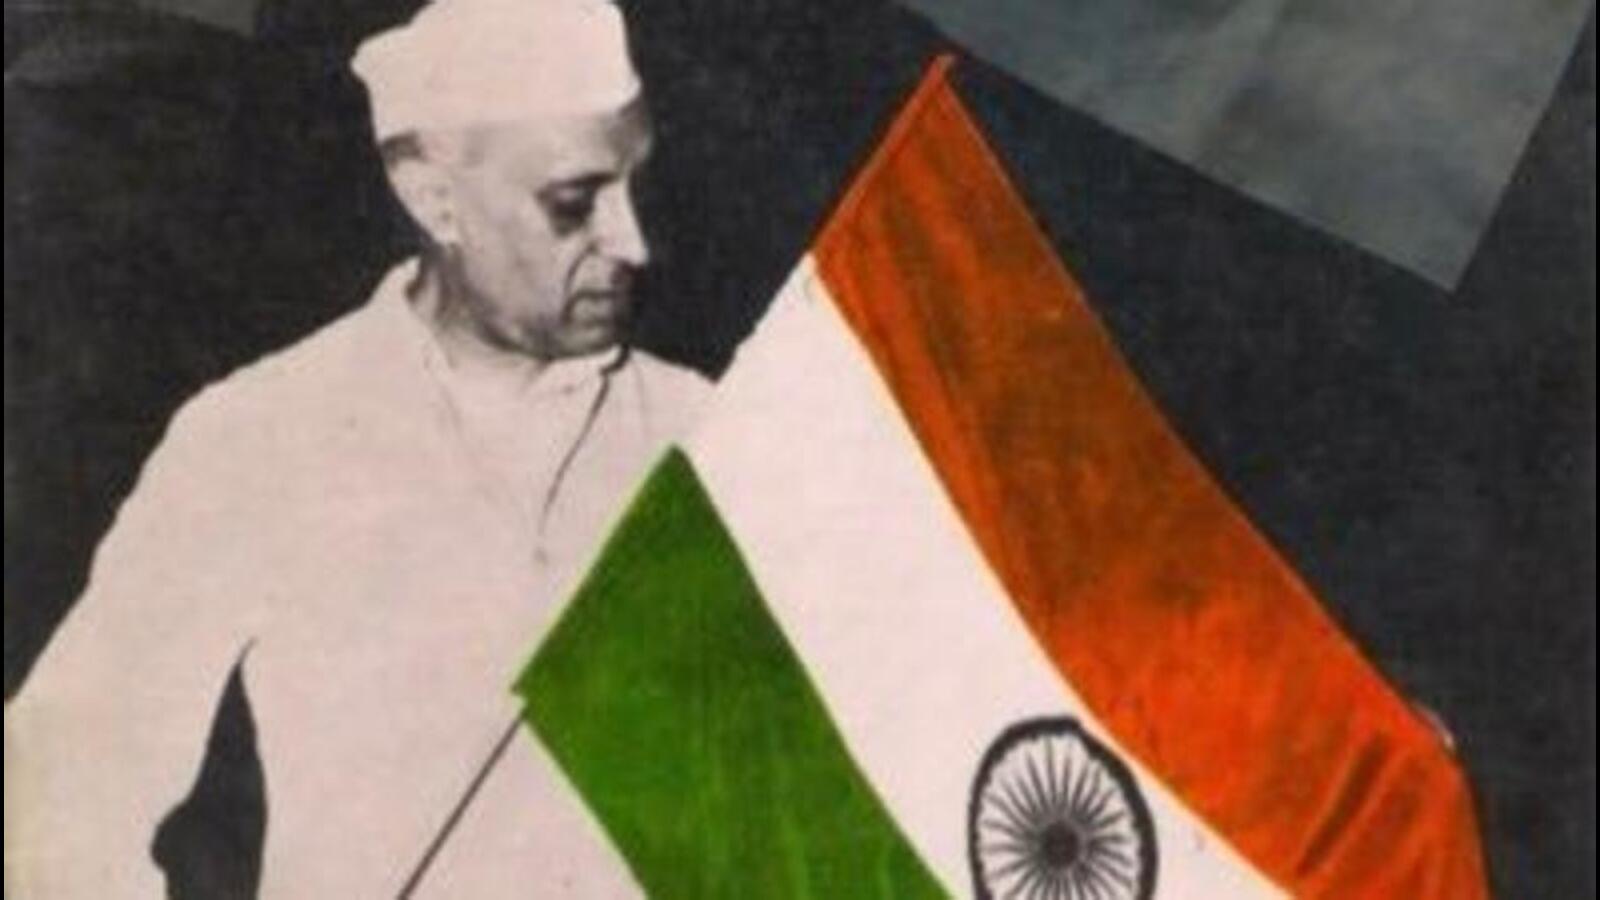 For Nehru, the flag represented 'the dynamic quality of India ...